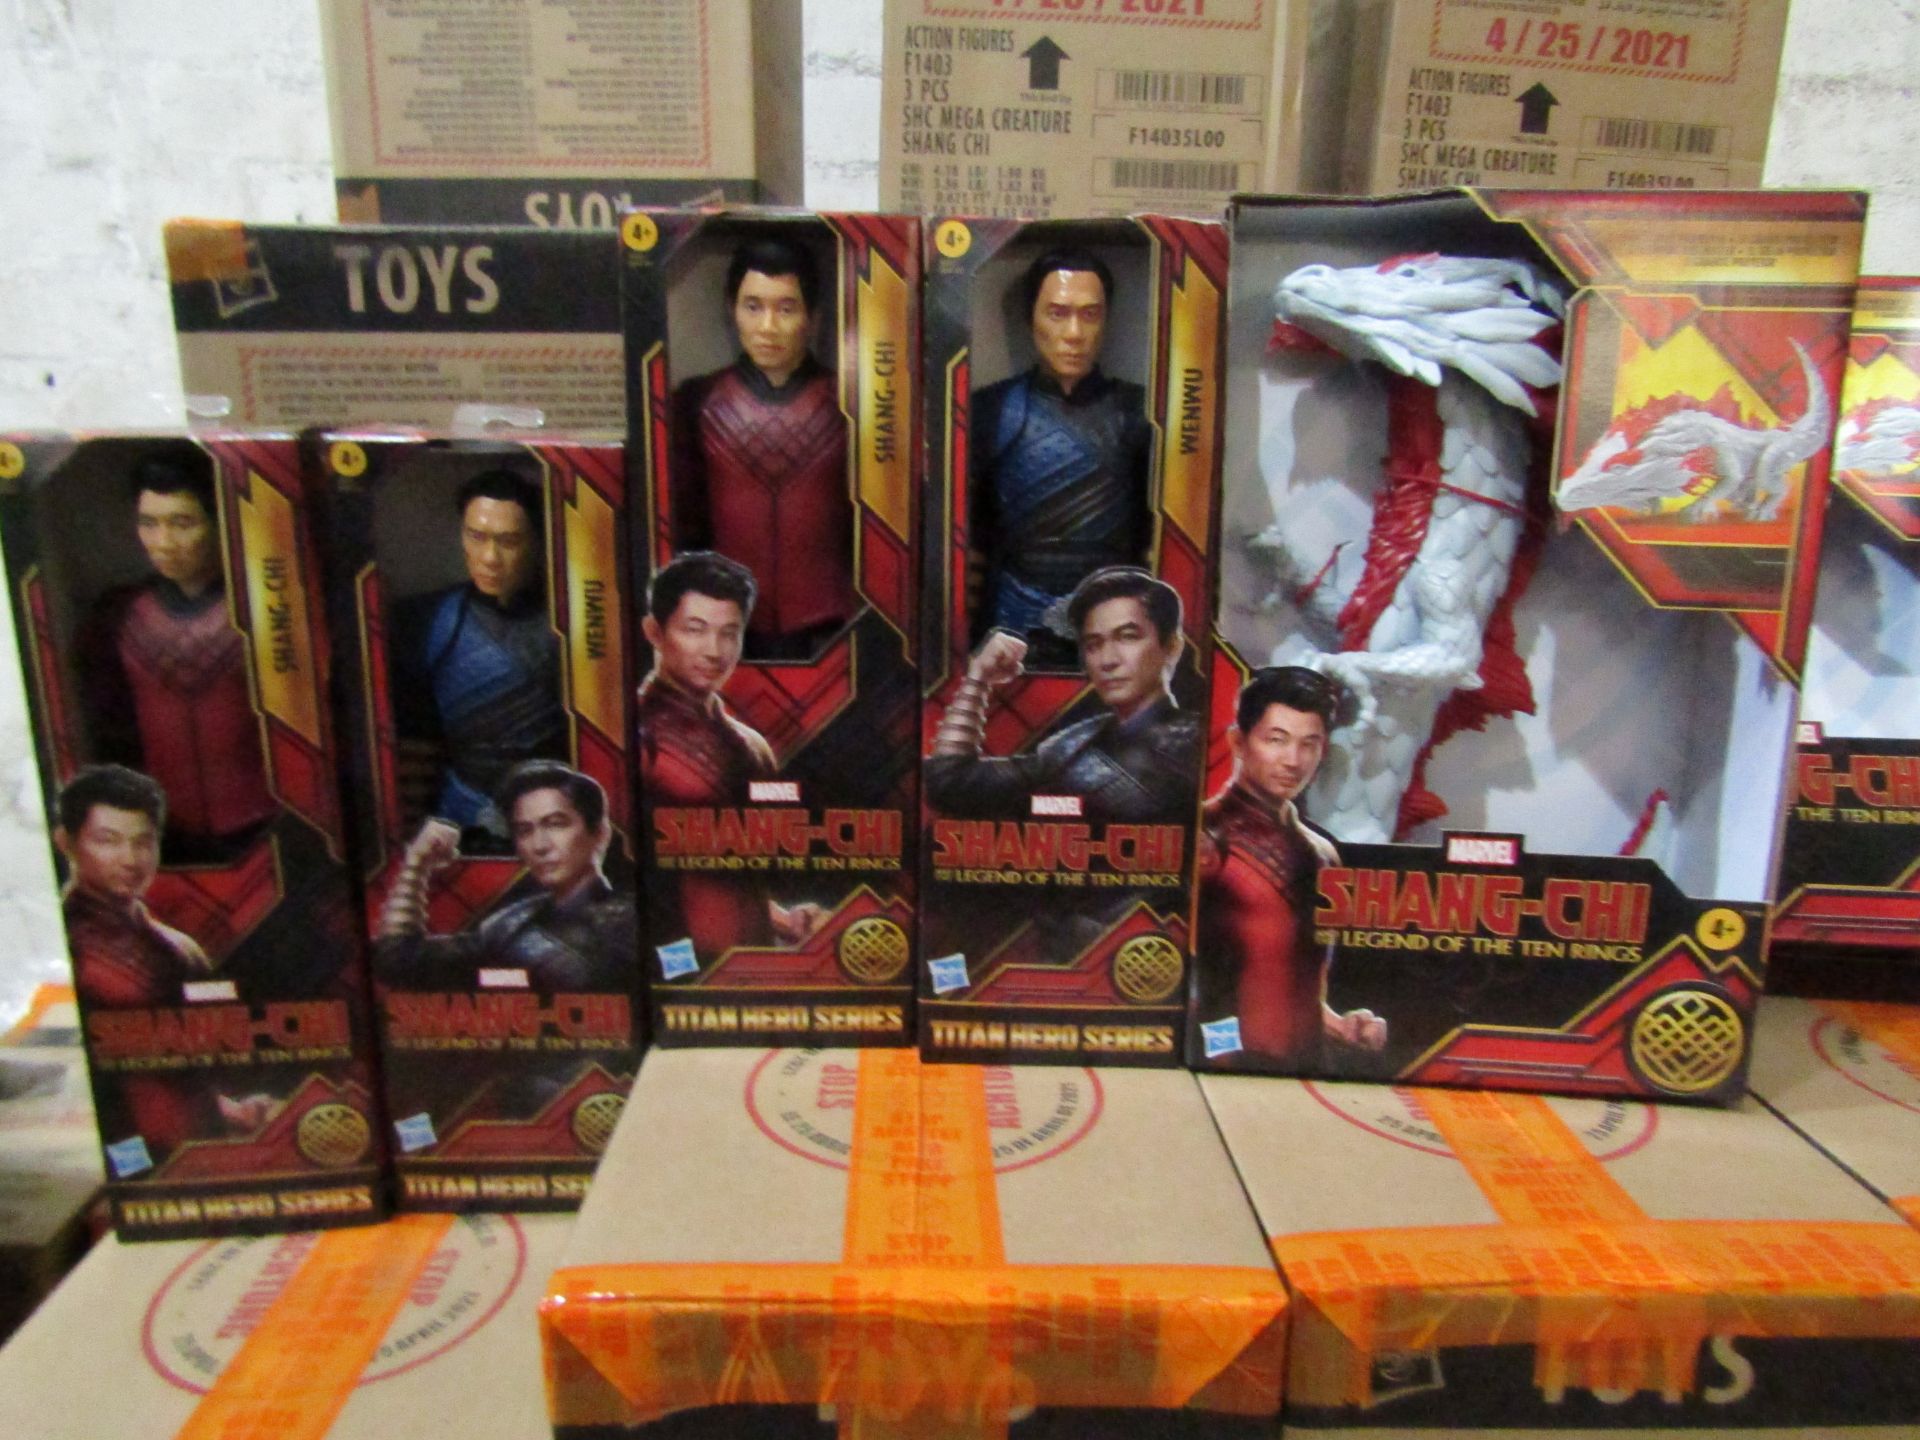 2 X Boxes of Toys being 1 Box of 4 Marvel Shang-Chi Titan Hero Series & 1 X Box of 3 Marvel Shang-